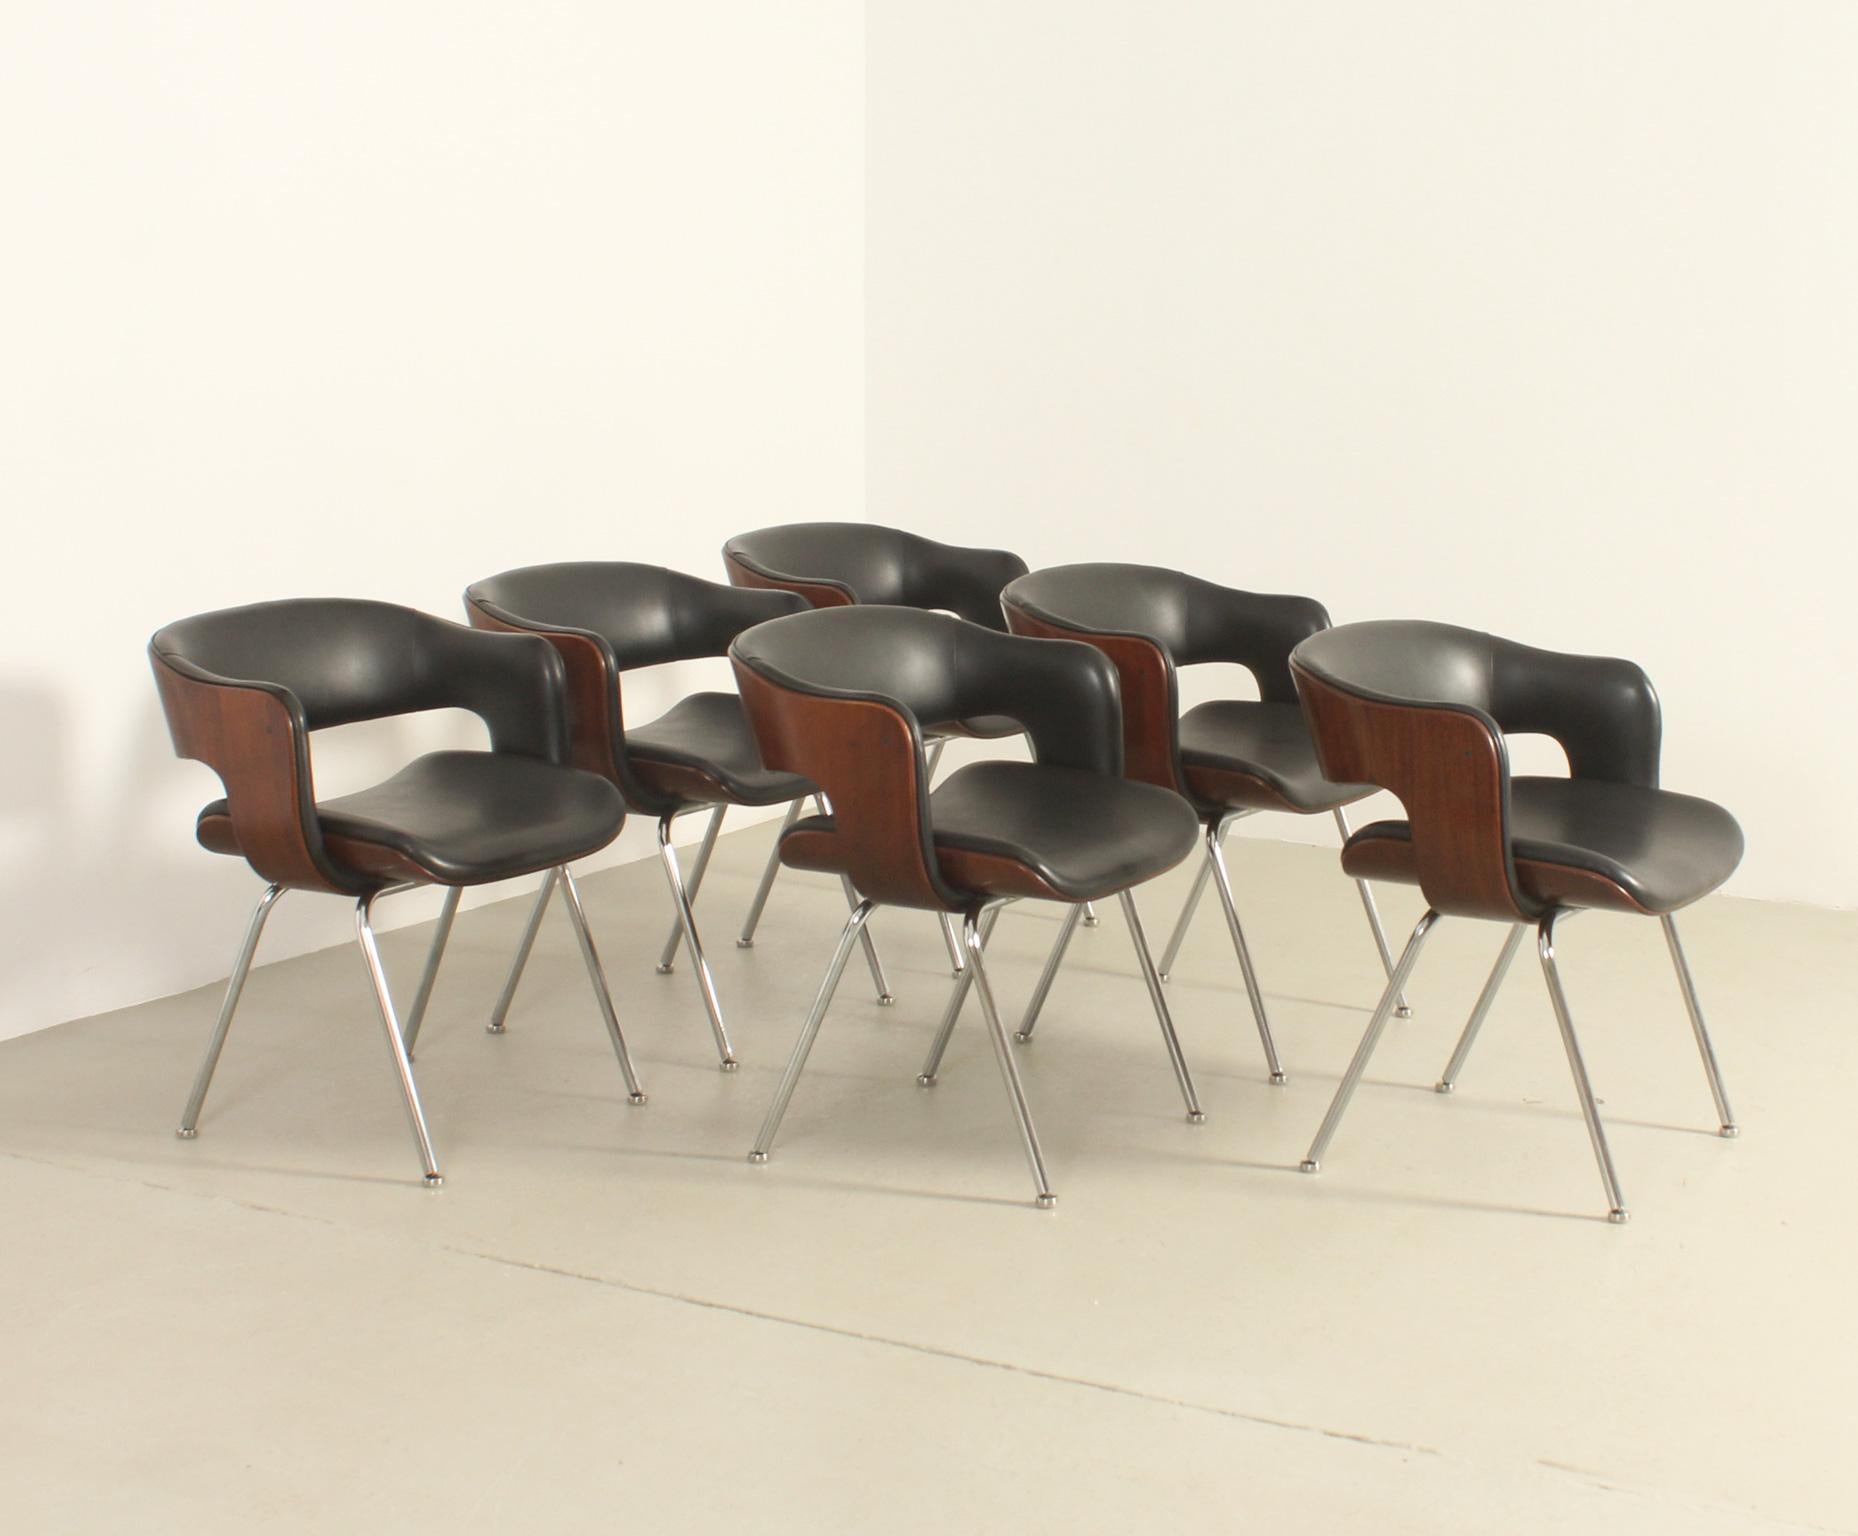 Set of six Oxford chairs designed in 1963 by British designer Martin Grierson for Arflex, Italy. Plywood molded shell upholstered in original black vinyl and polished steel bases.